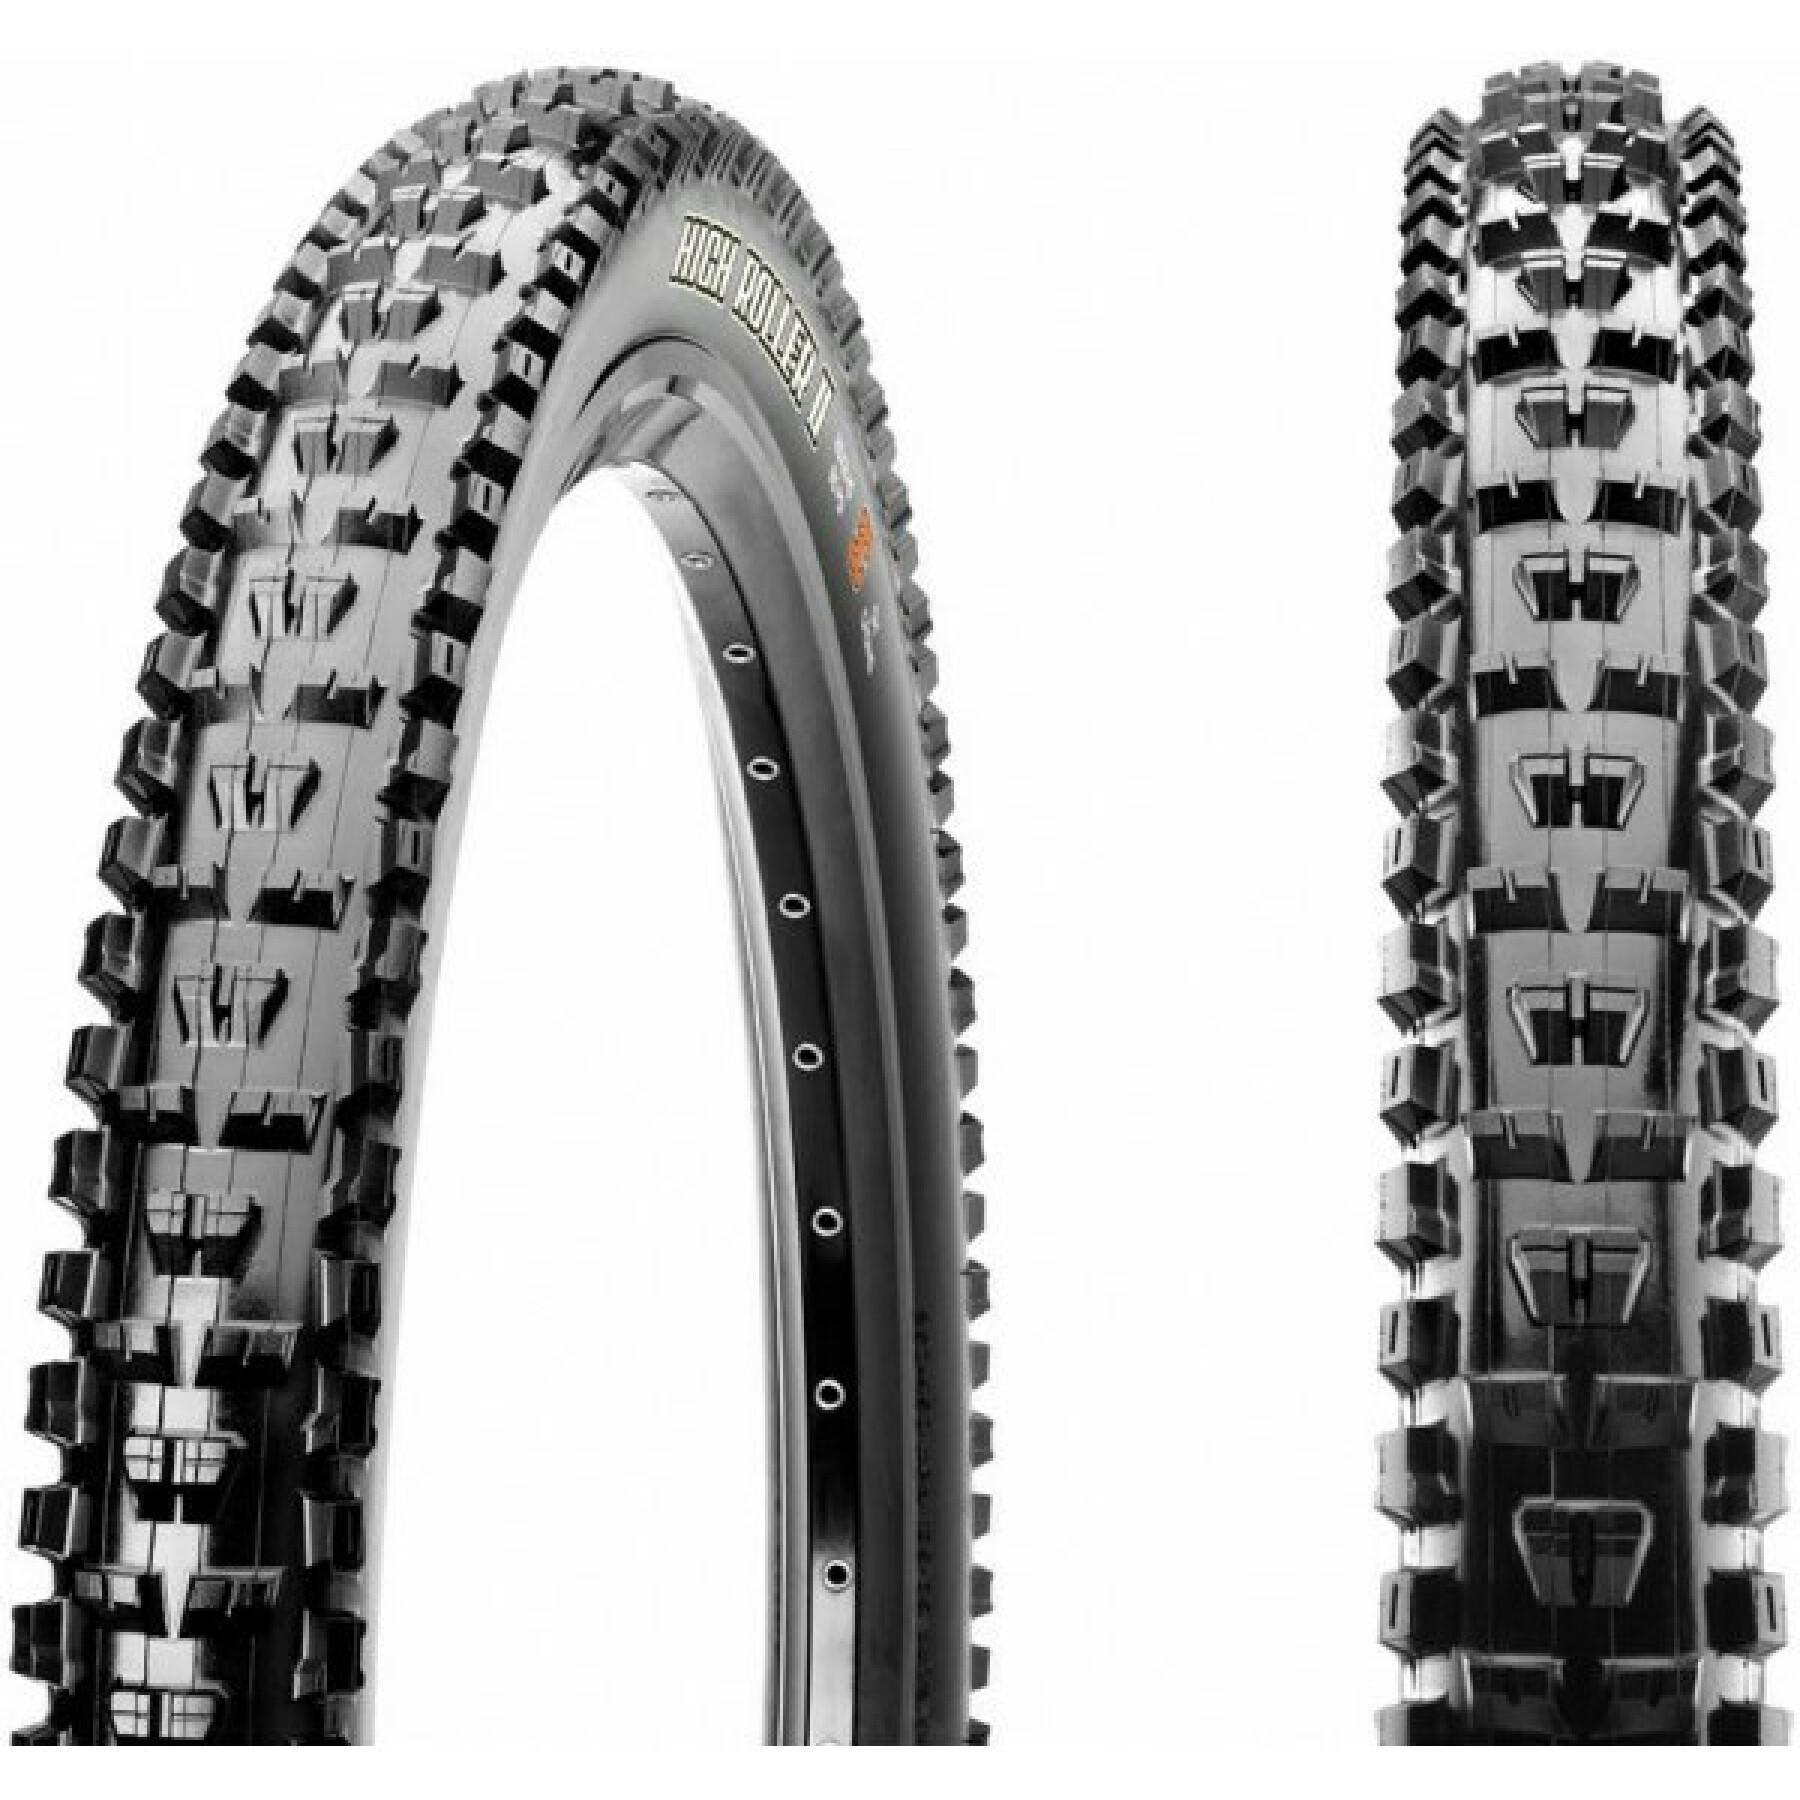 Rigid tire Maxxis High Roller II super tacky DH - Tyres - Wheels and Tyres  - MTB